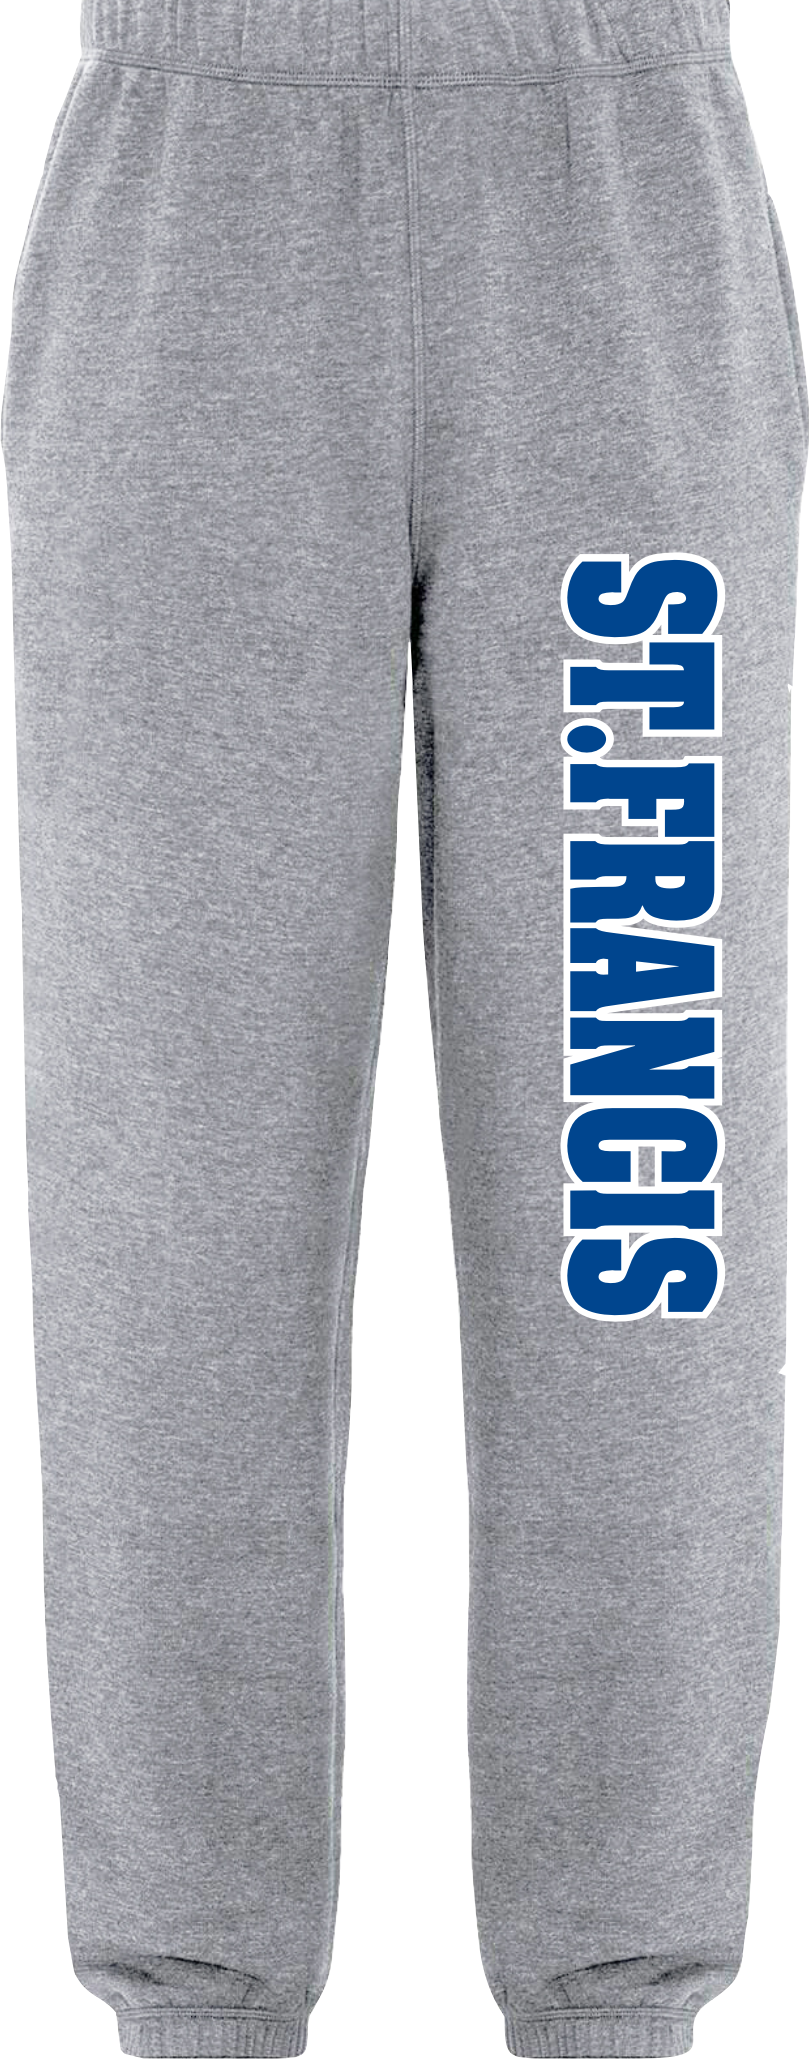 St Francis pocketed sweat pant